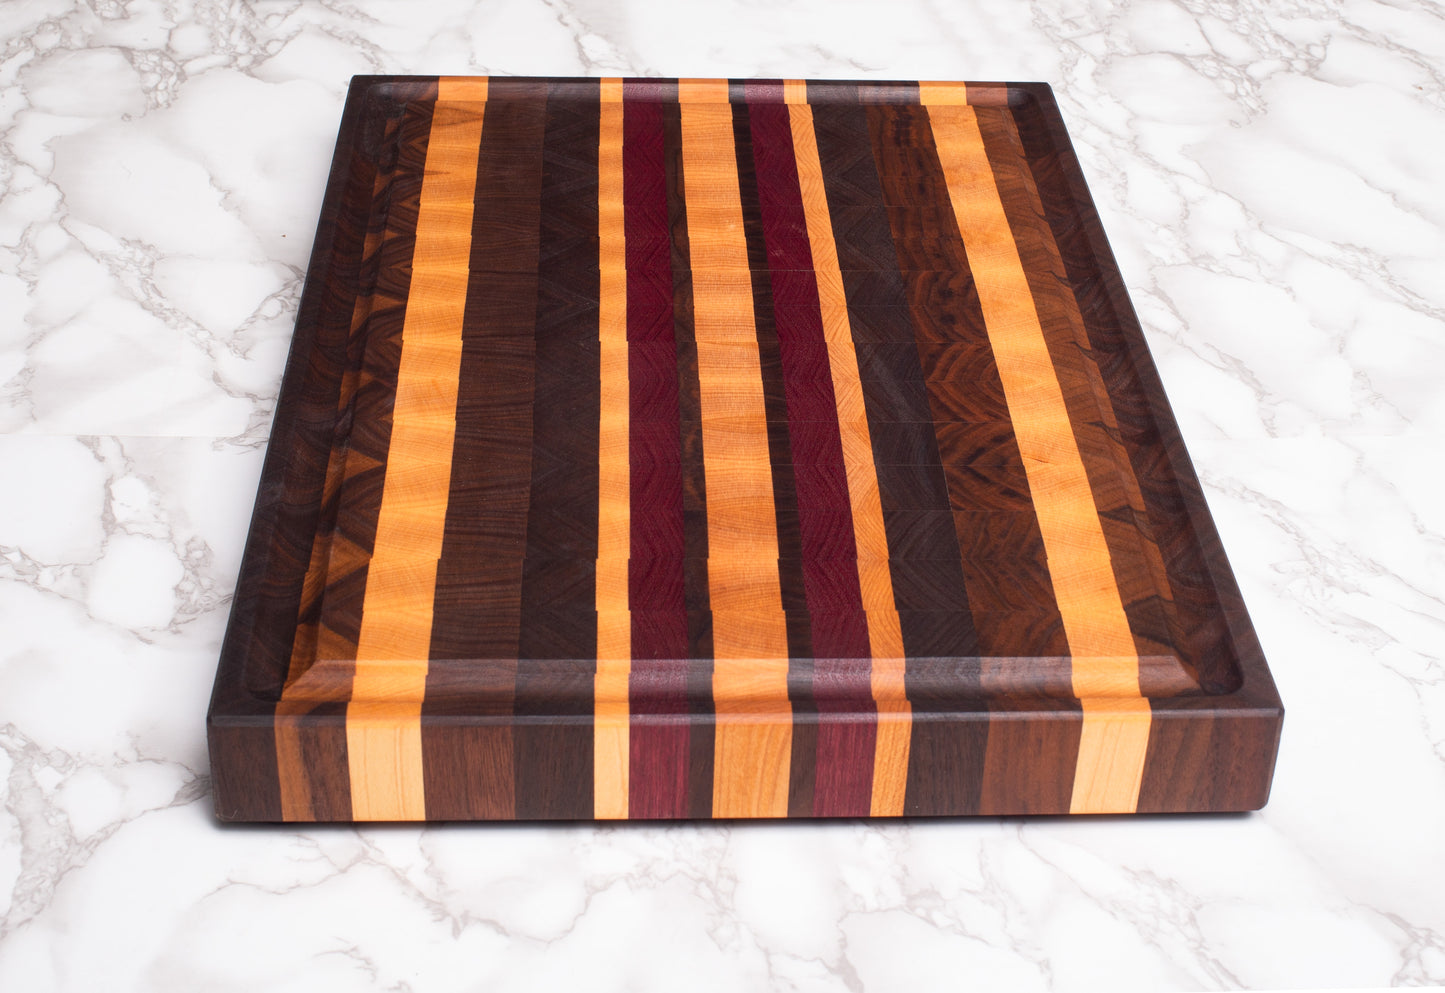 Large Multi-Wood Endgrain Cutting Board with Well and Rubber Feet